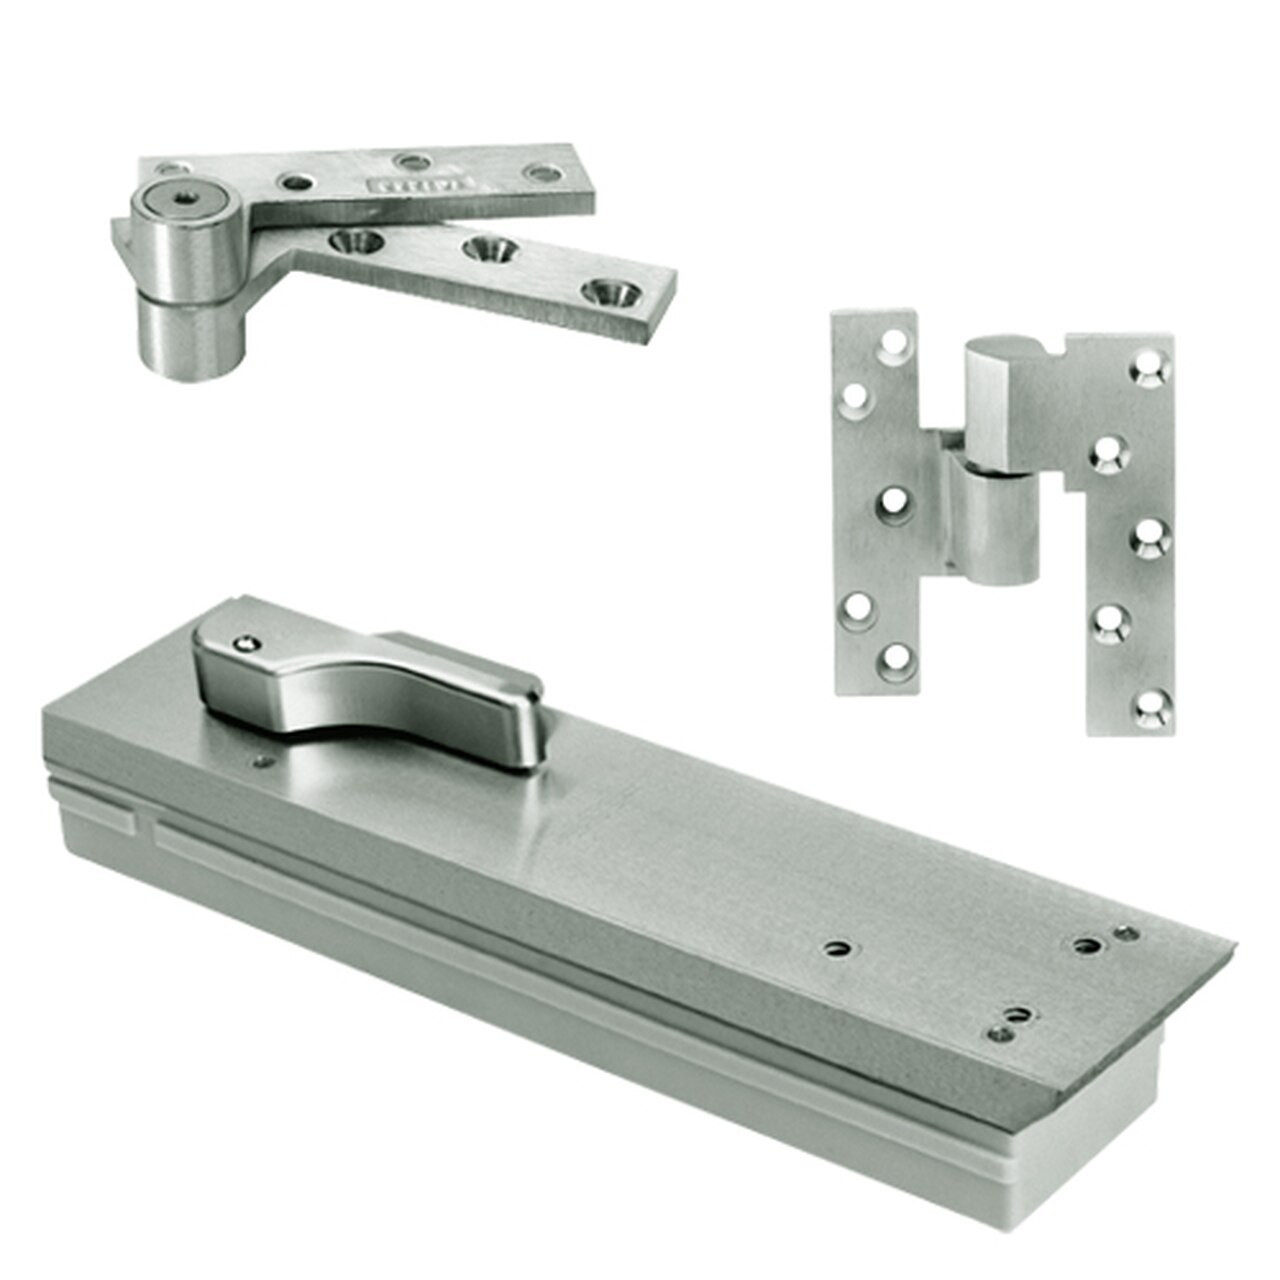 FQ5105NBC-SC-RH-619 Rixson Q51 Series Fire Rated 3/4" Offset Hung Shallow Depth Floor Closers in Satin Nickel Finish